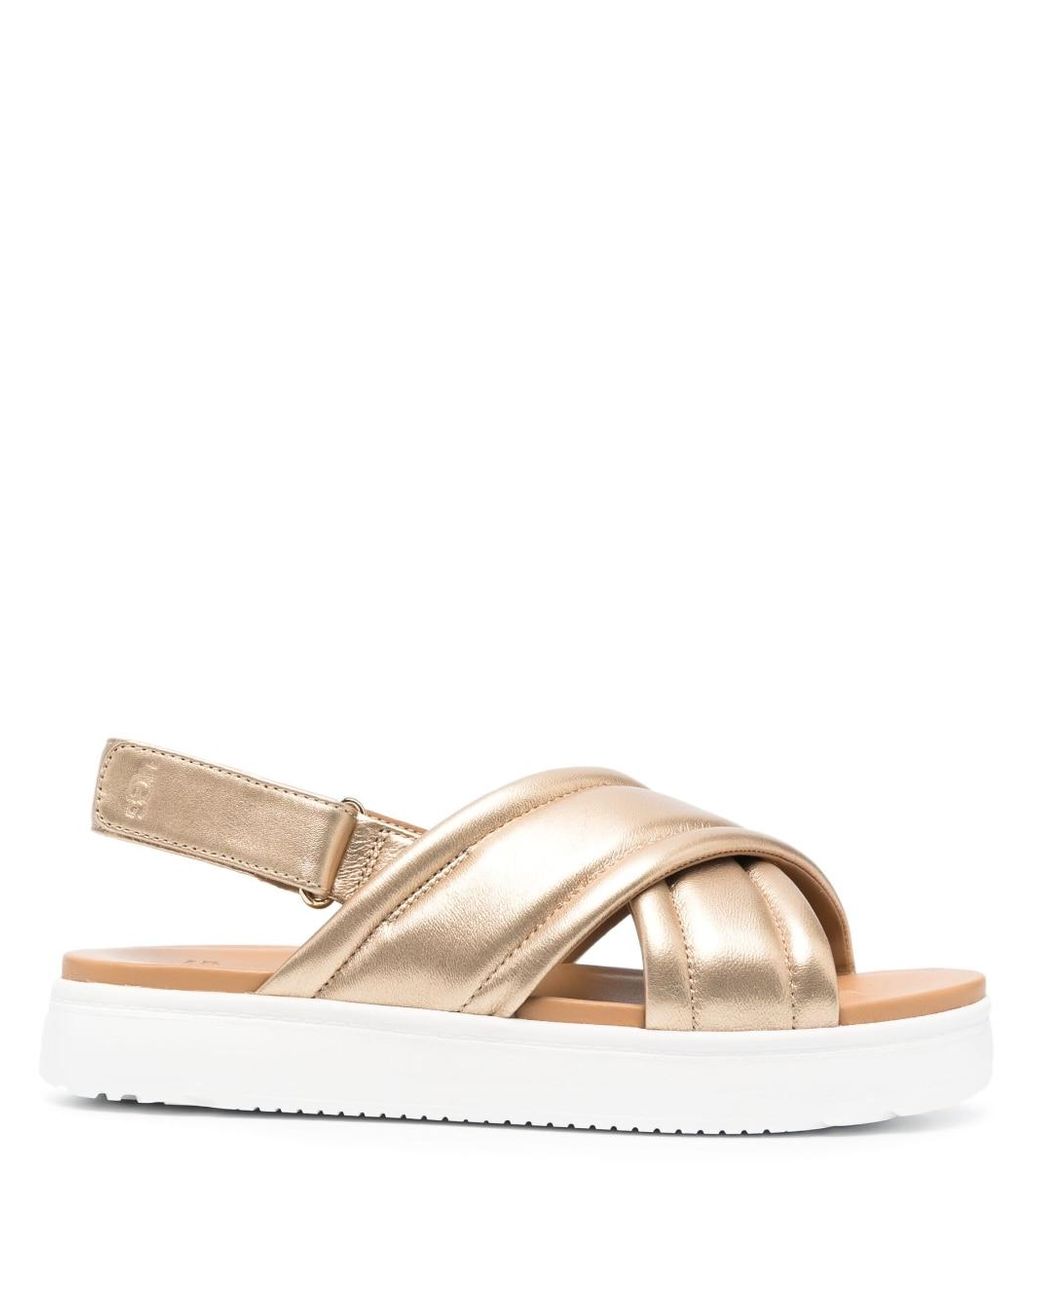 UGG Crossover-strap Sandals in Natural | Lyst